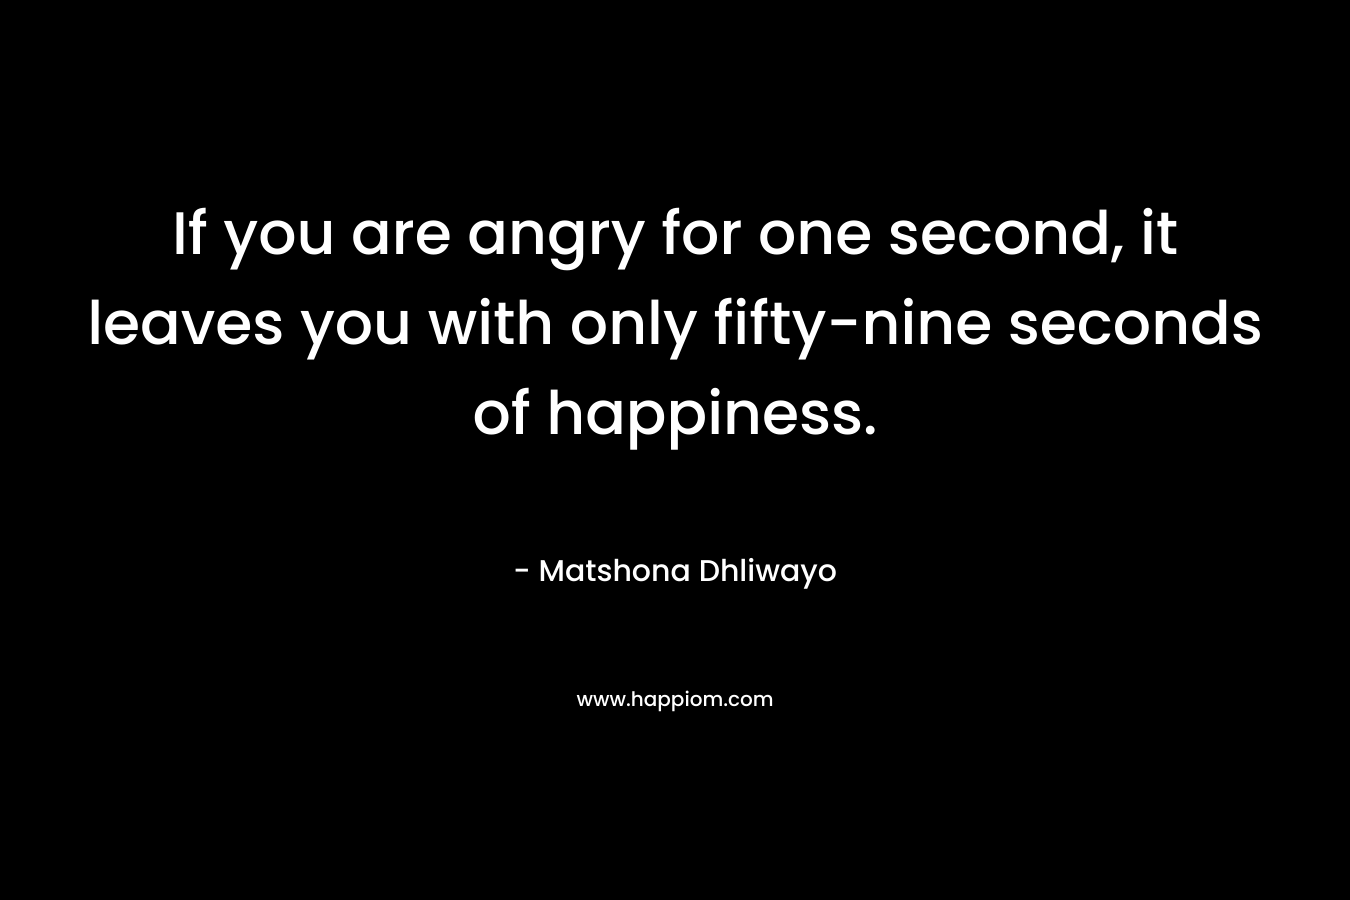 If you are angry for one second, it leaves you with only fifty-nine seconds of happiness.